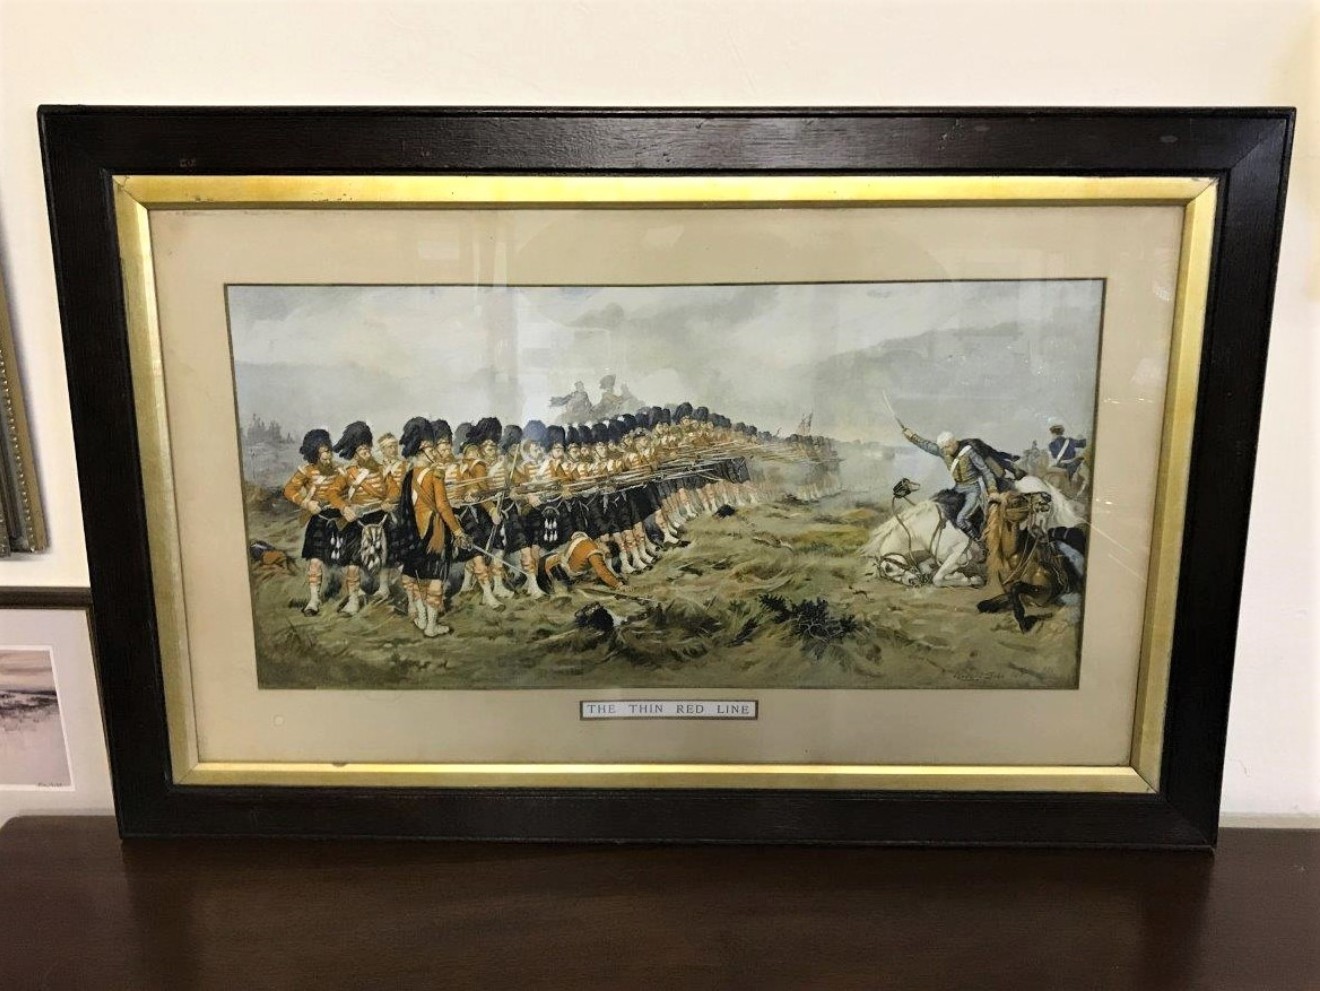 Antique Print "The Thin Red Line" by Robert Gibb